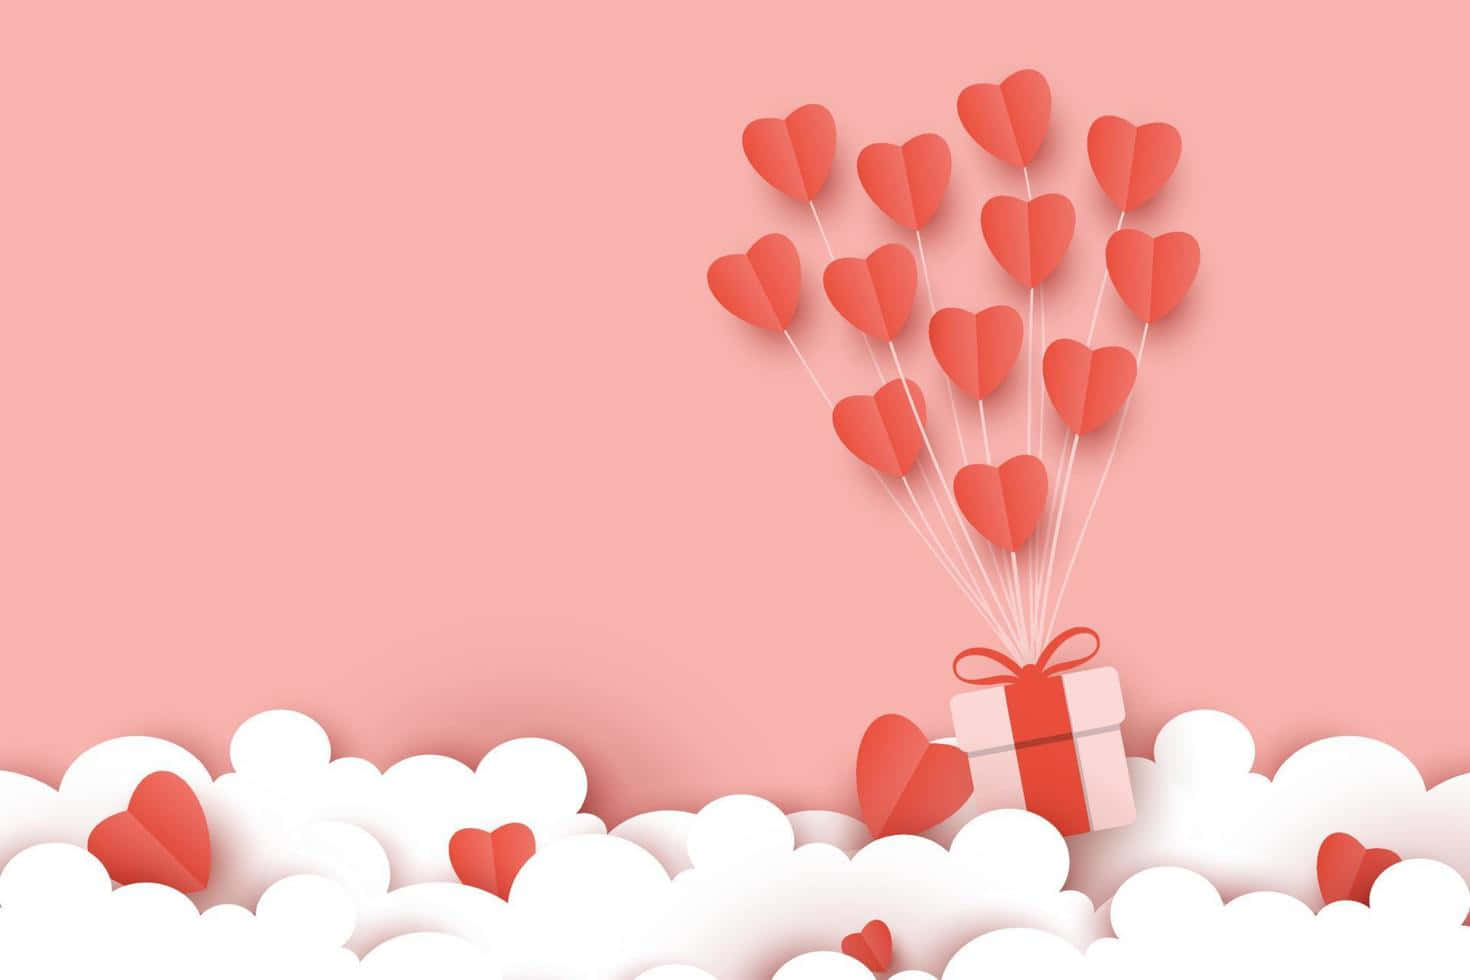 Cute Valentines Day Gift With Heart Balloons Vector Art Background